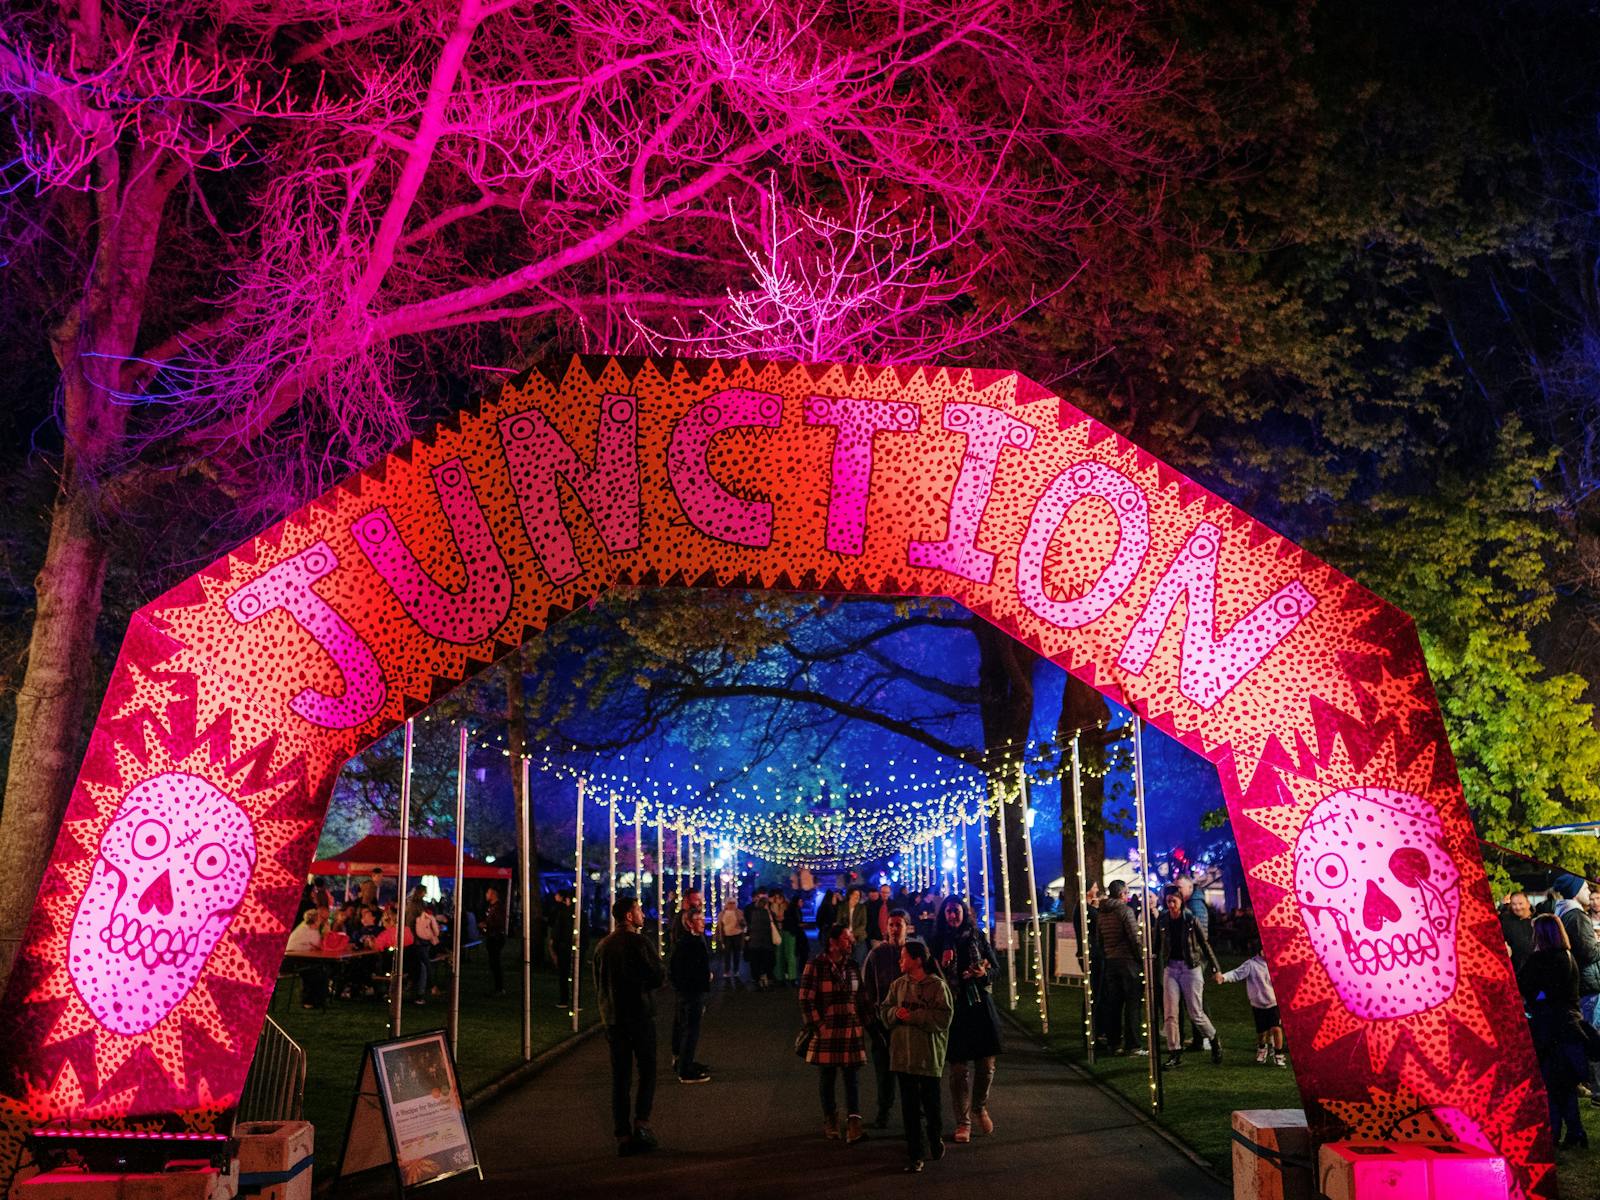 Lit archway that has "Junction" written on it